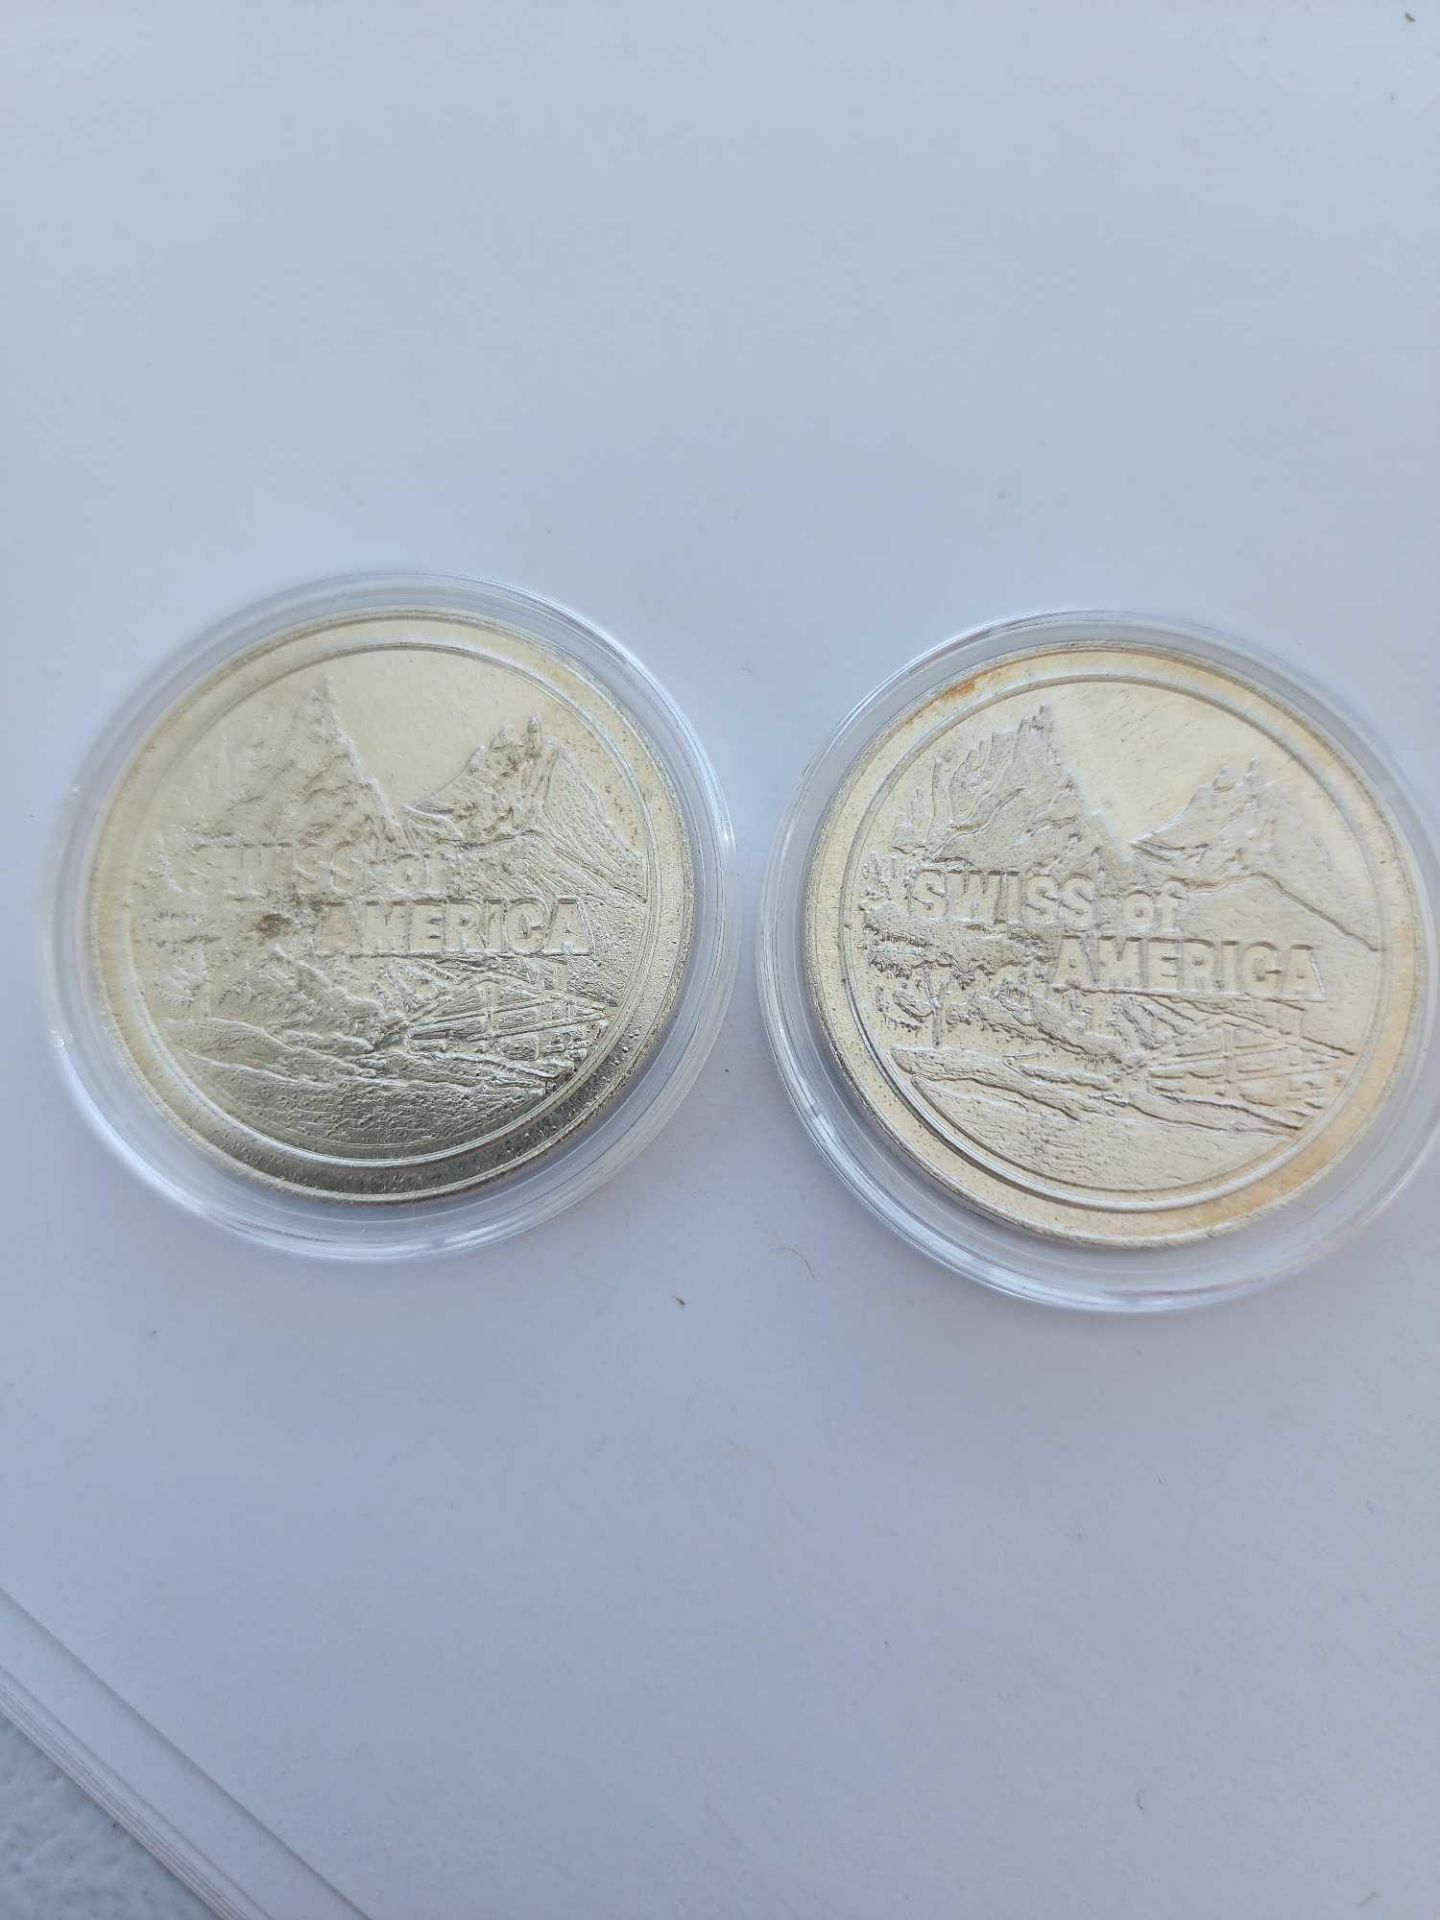 2 Swiss of America Silver Coins